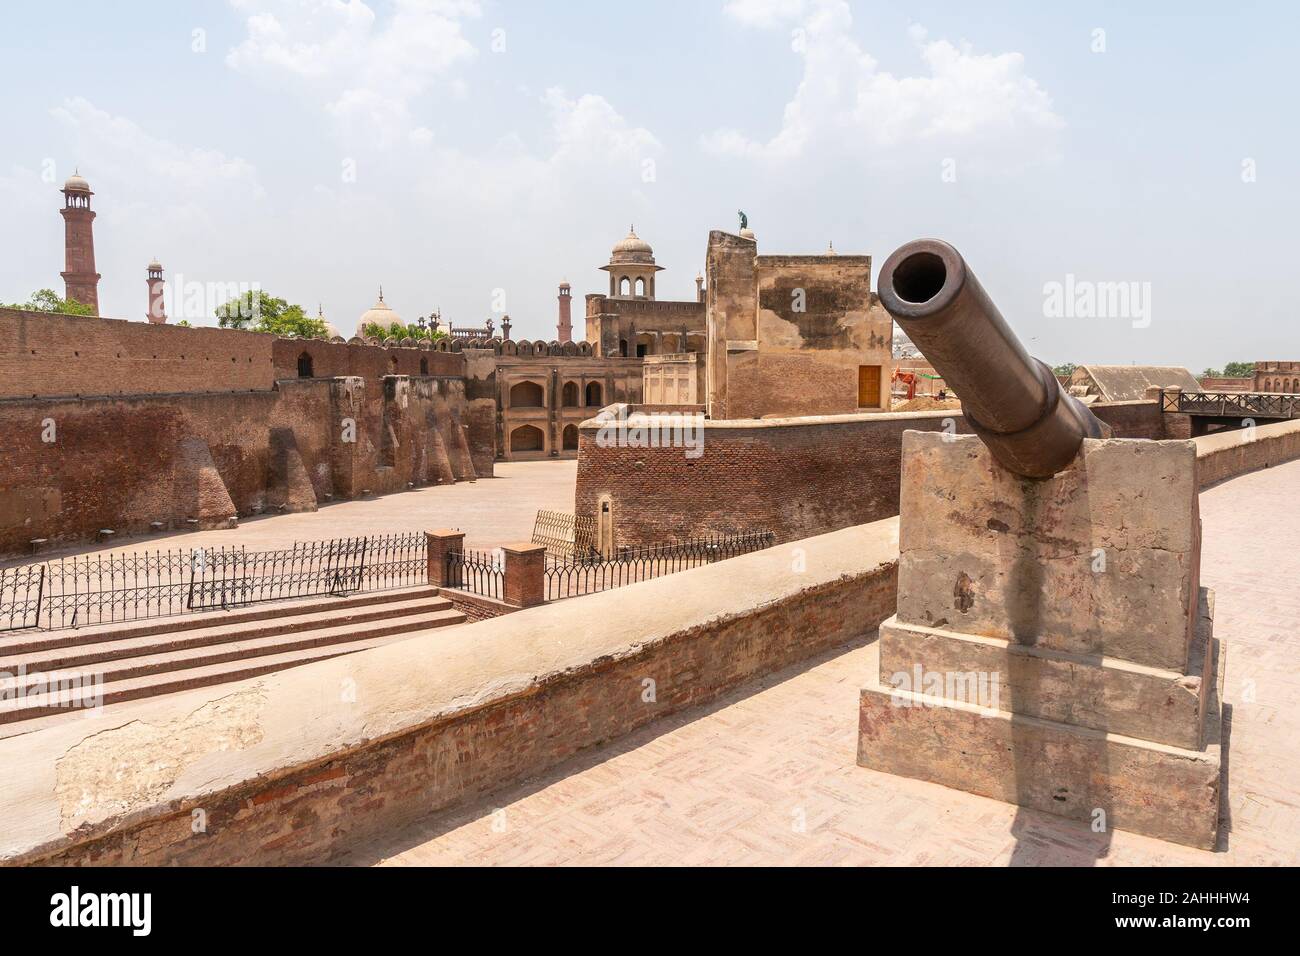 Lahore Fort Picturesque Breathtaking View of Gun from the British Raj Era on a Sunny Blue Sky Day Stock Photo